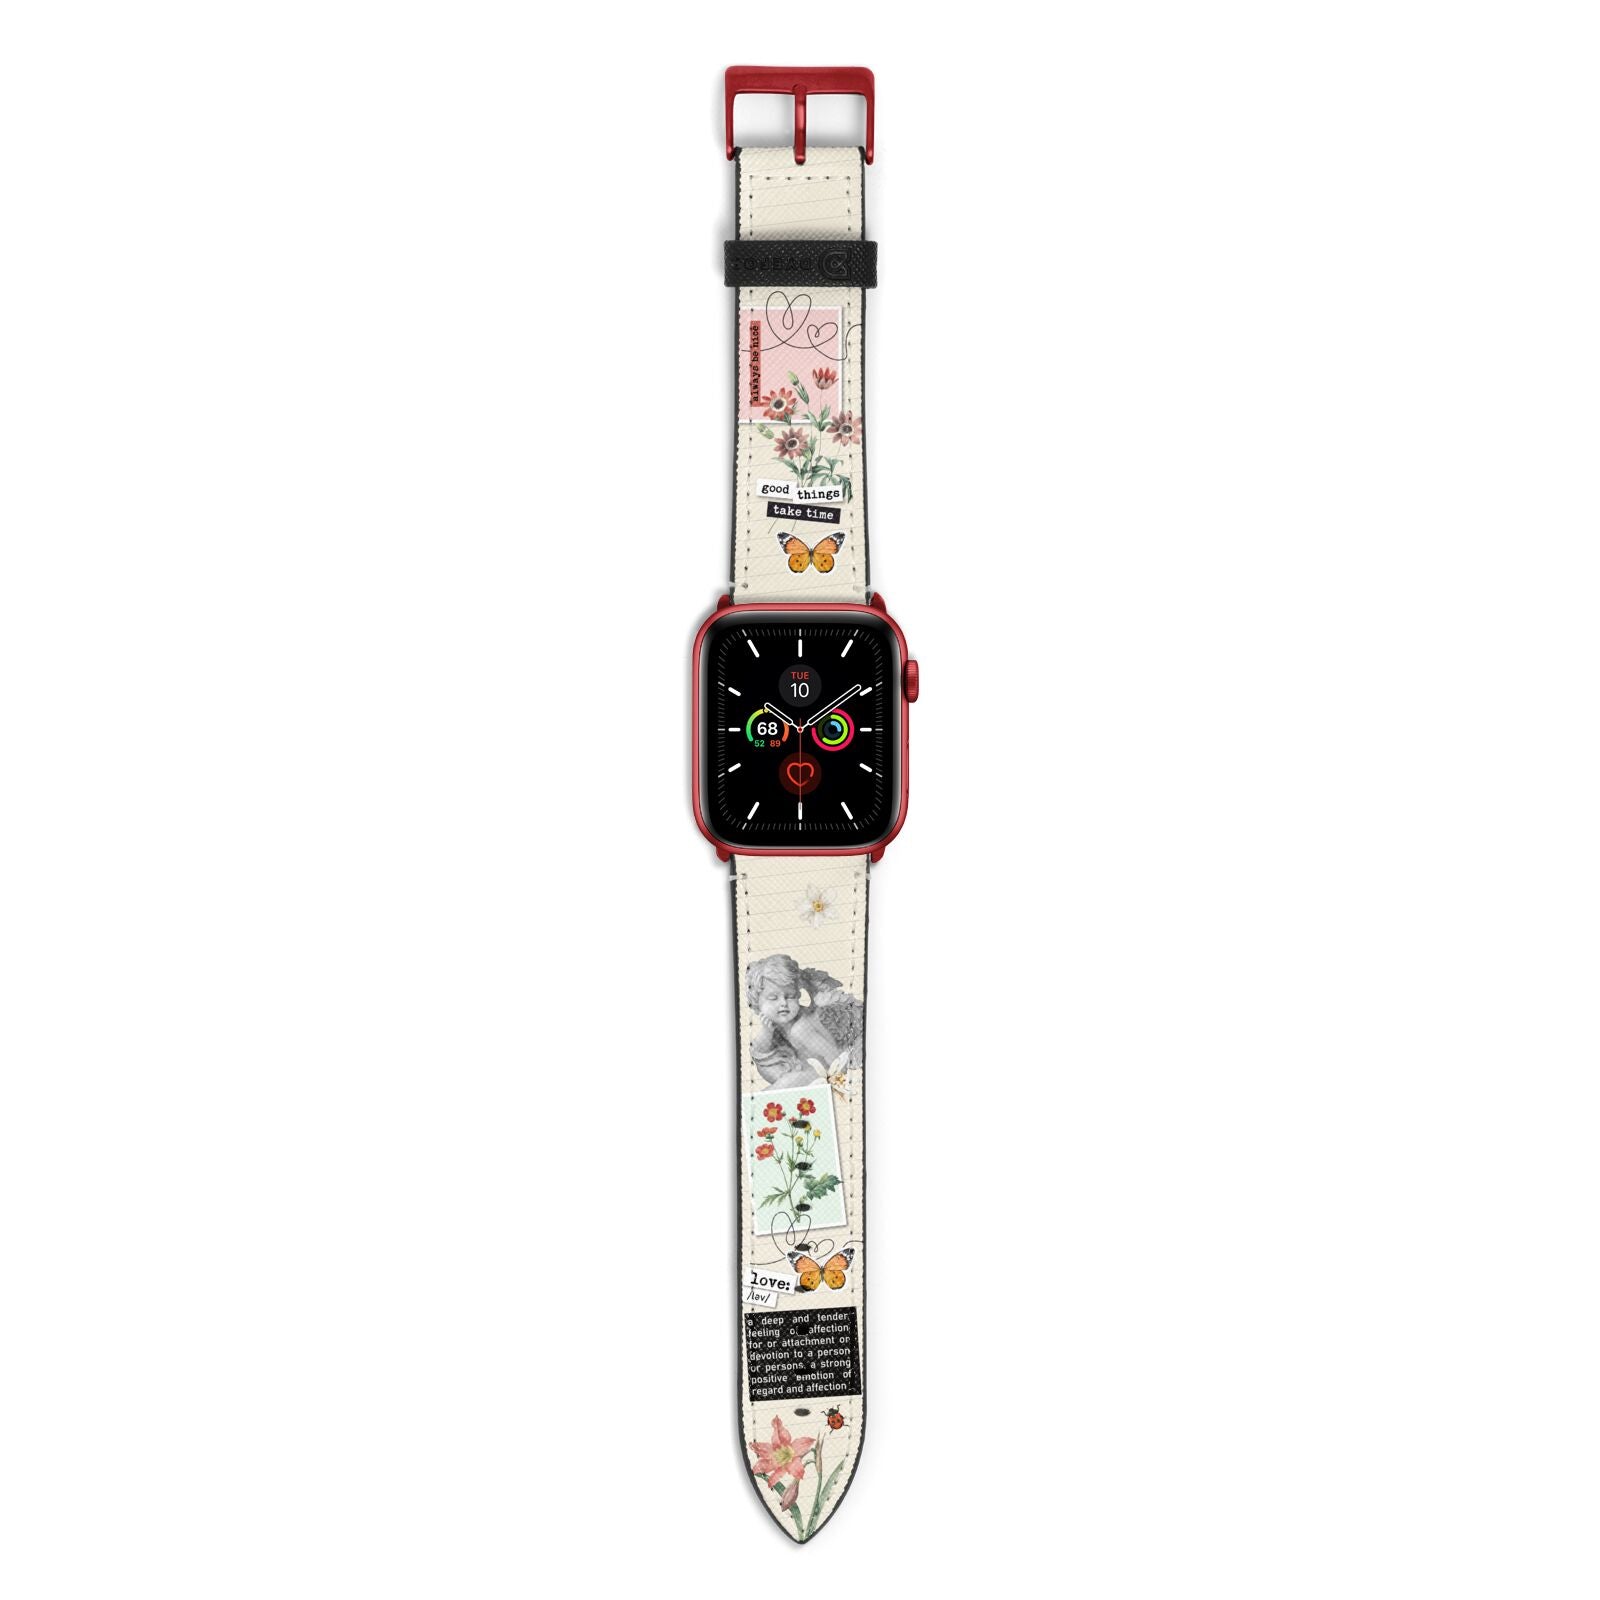 Vintage Love Collage Apple Watch Strap with Red Hardware